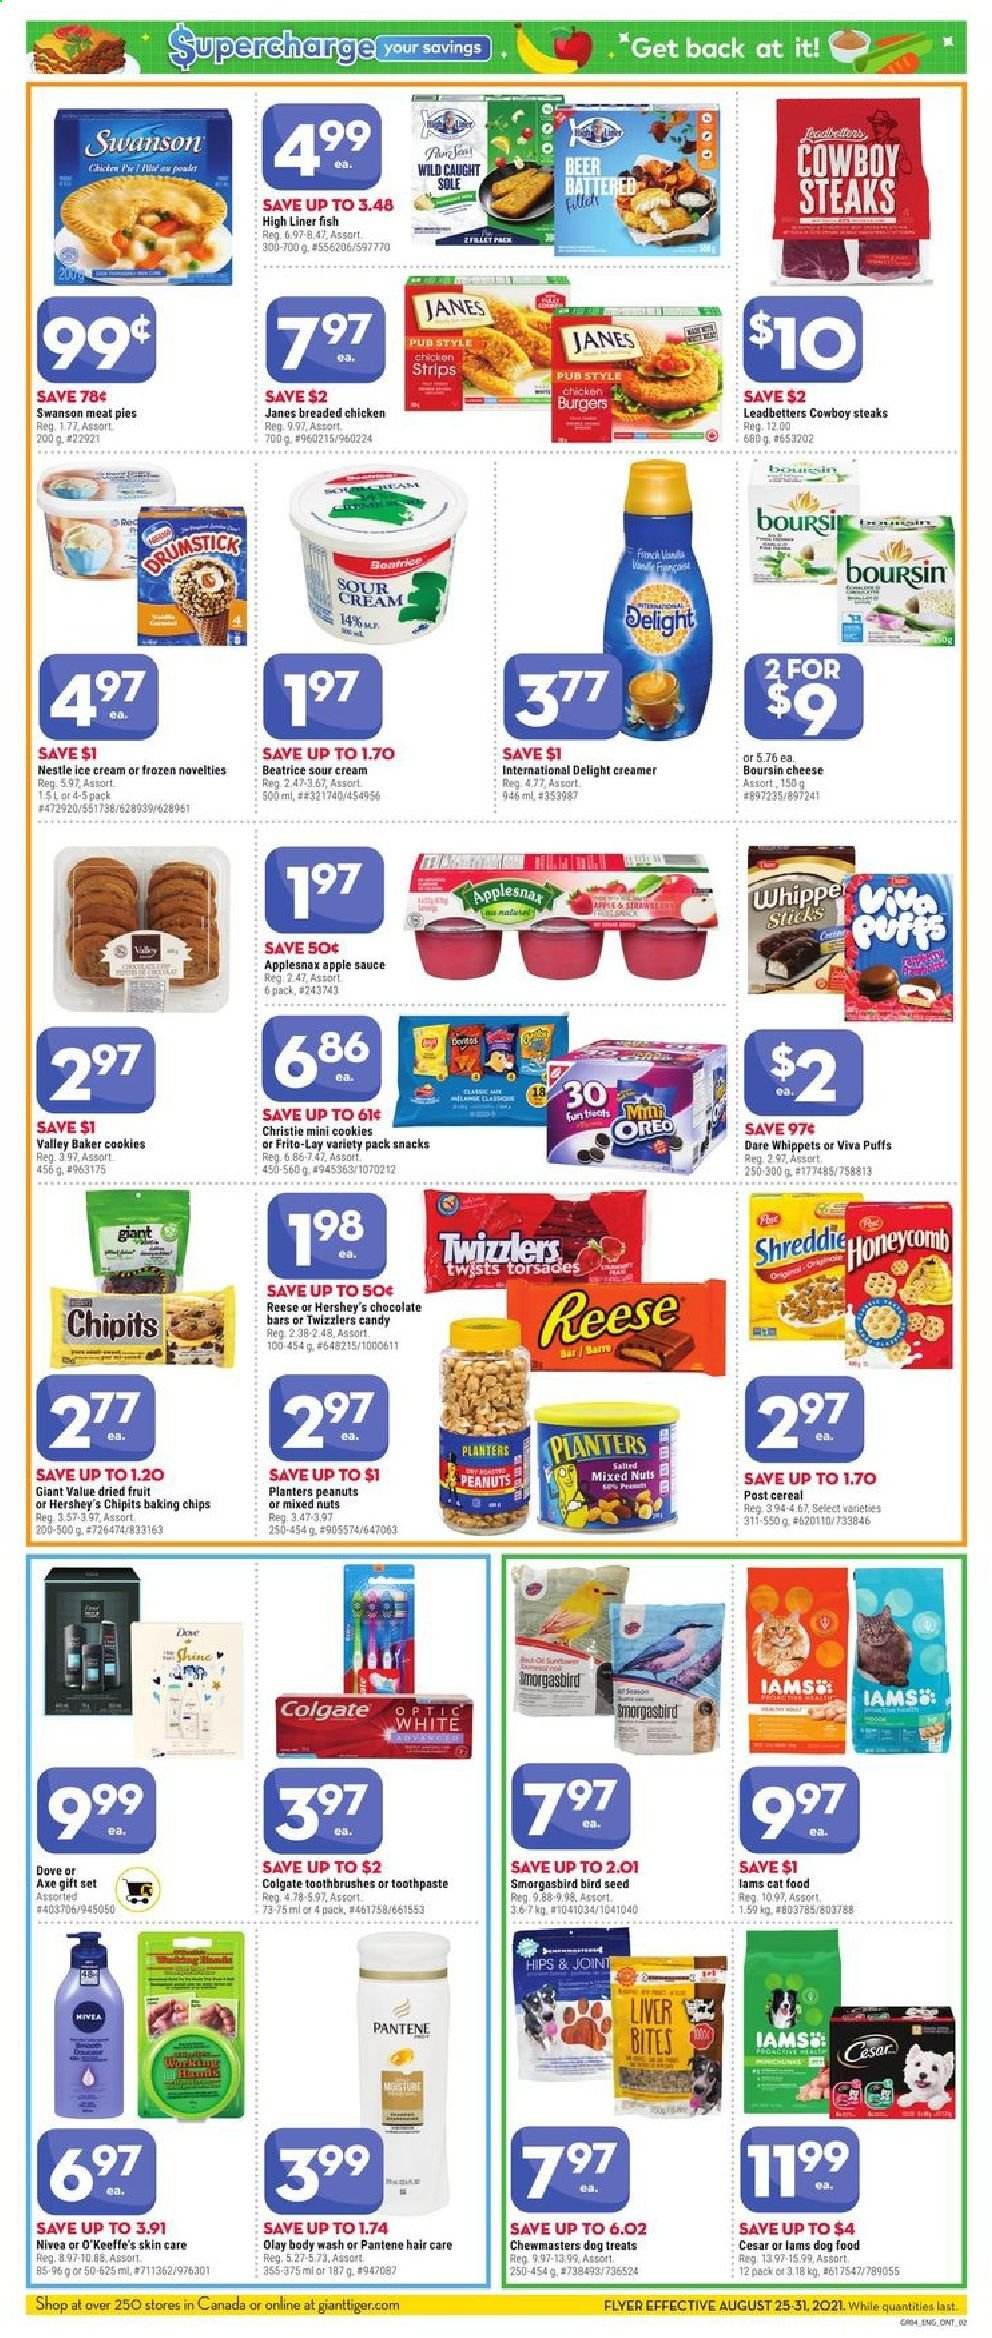 thumbnail - Giant Tiger Flyer - August 25, 2021 - August 31, 2021 - Sales products - puffs, fish, hamburger, sauce, fried chicken, cheese, sour cream, creamer, Hershey's, strips, chicken strips, cookies, snack, chocolate bar, baking chips, cereals, apple sauce, peanuts, dried fruit, mixed nuts, Planters, beer, body wash, toothpaste, Olay, gift set, animal food, bird food, cat food, dog food, plant seeds, Iams, Oreo, Nestlé, Pantene, Nivea, steak. Page 2.